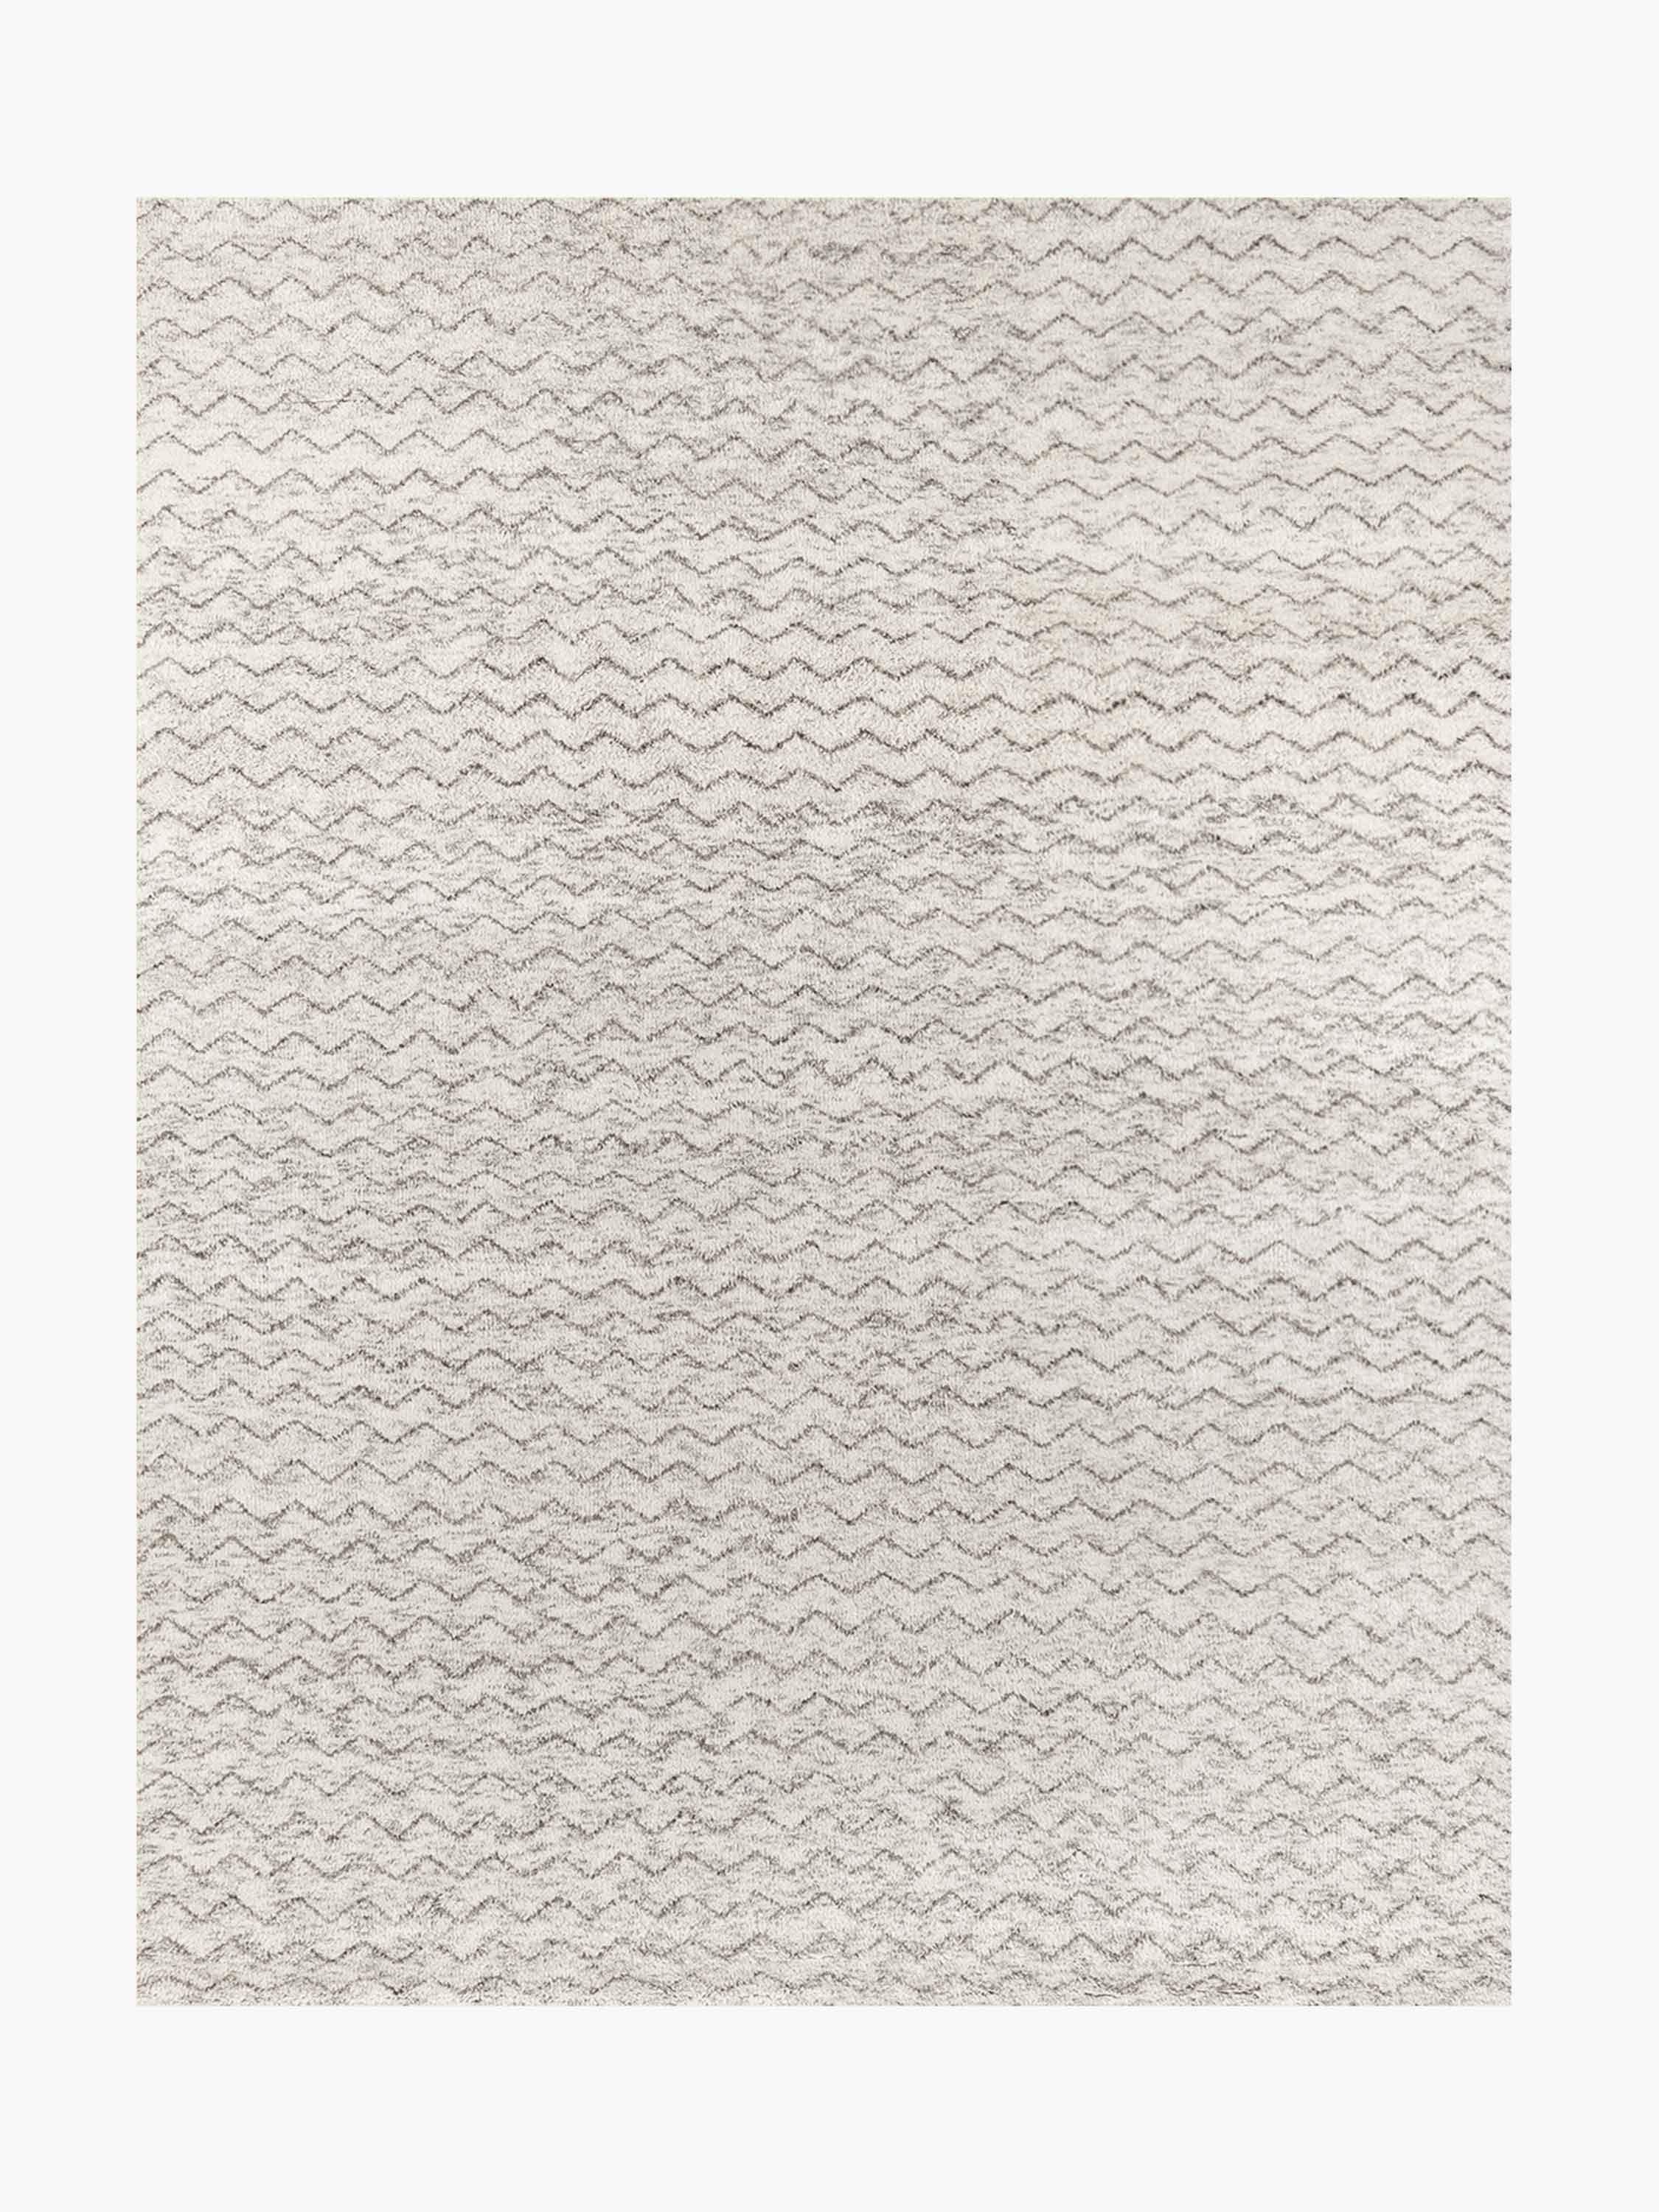 For Sale: Silver Ben Soleimani Mina Moroccan Rug– Ultra-plush Hand-knotted Zigzag Grey 9'x12'